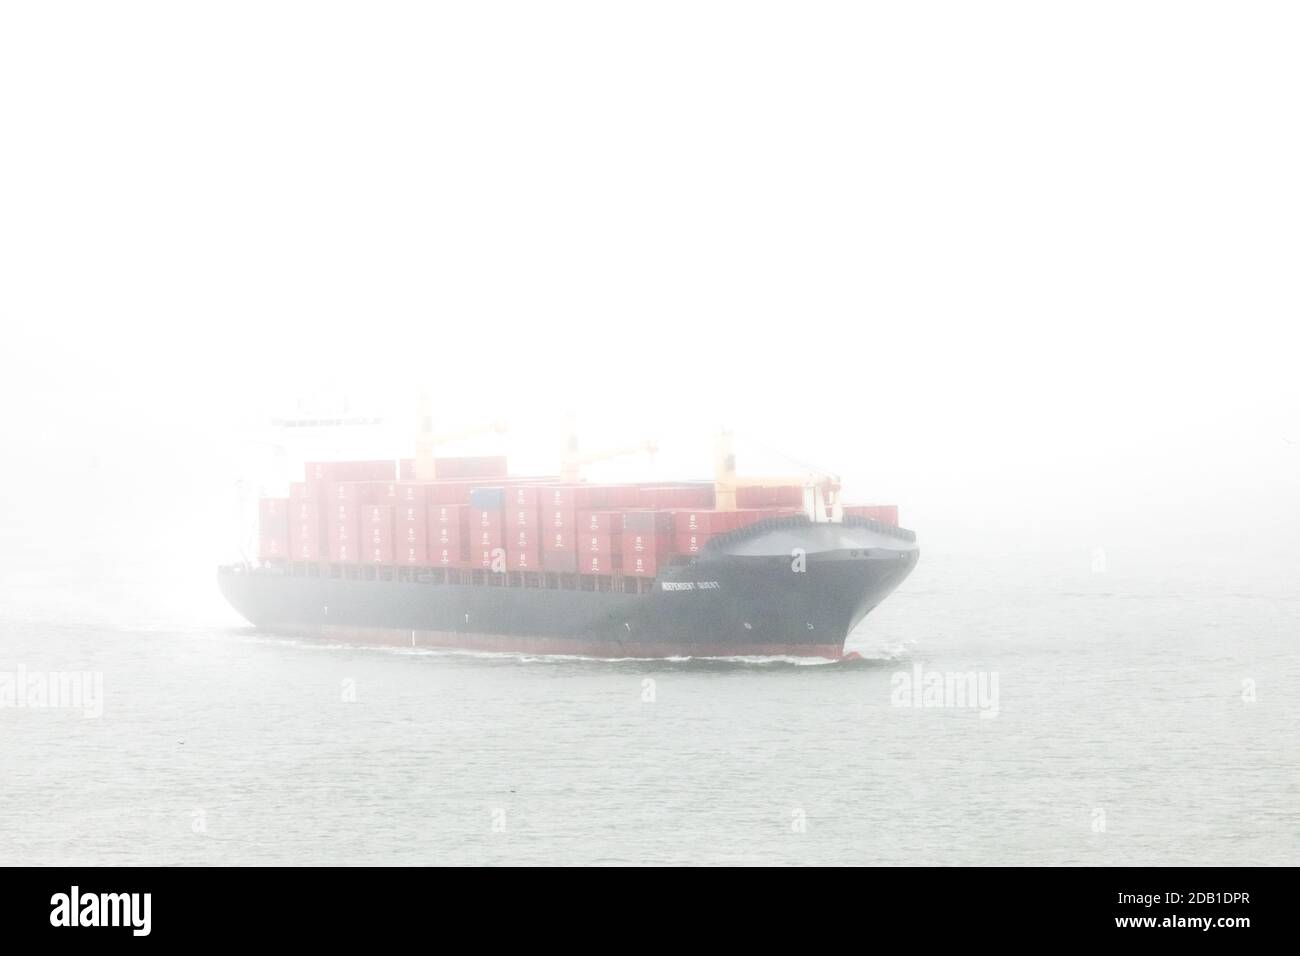 Cork Harbour, Cork, Ireland. 16th November, 2020. Container ship Independent Quest makes her way through Cork Harbour in heavy mist and fog as she departs with exports destined for Chester, Pennsylvania.  - Credit; David Creedon / Alamy Live News Stock Photo